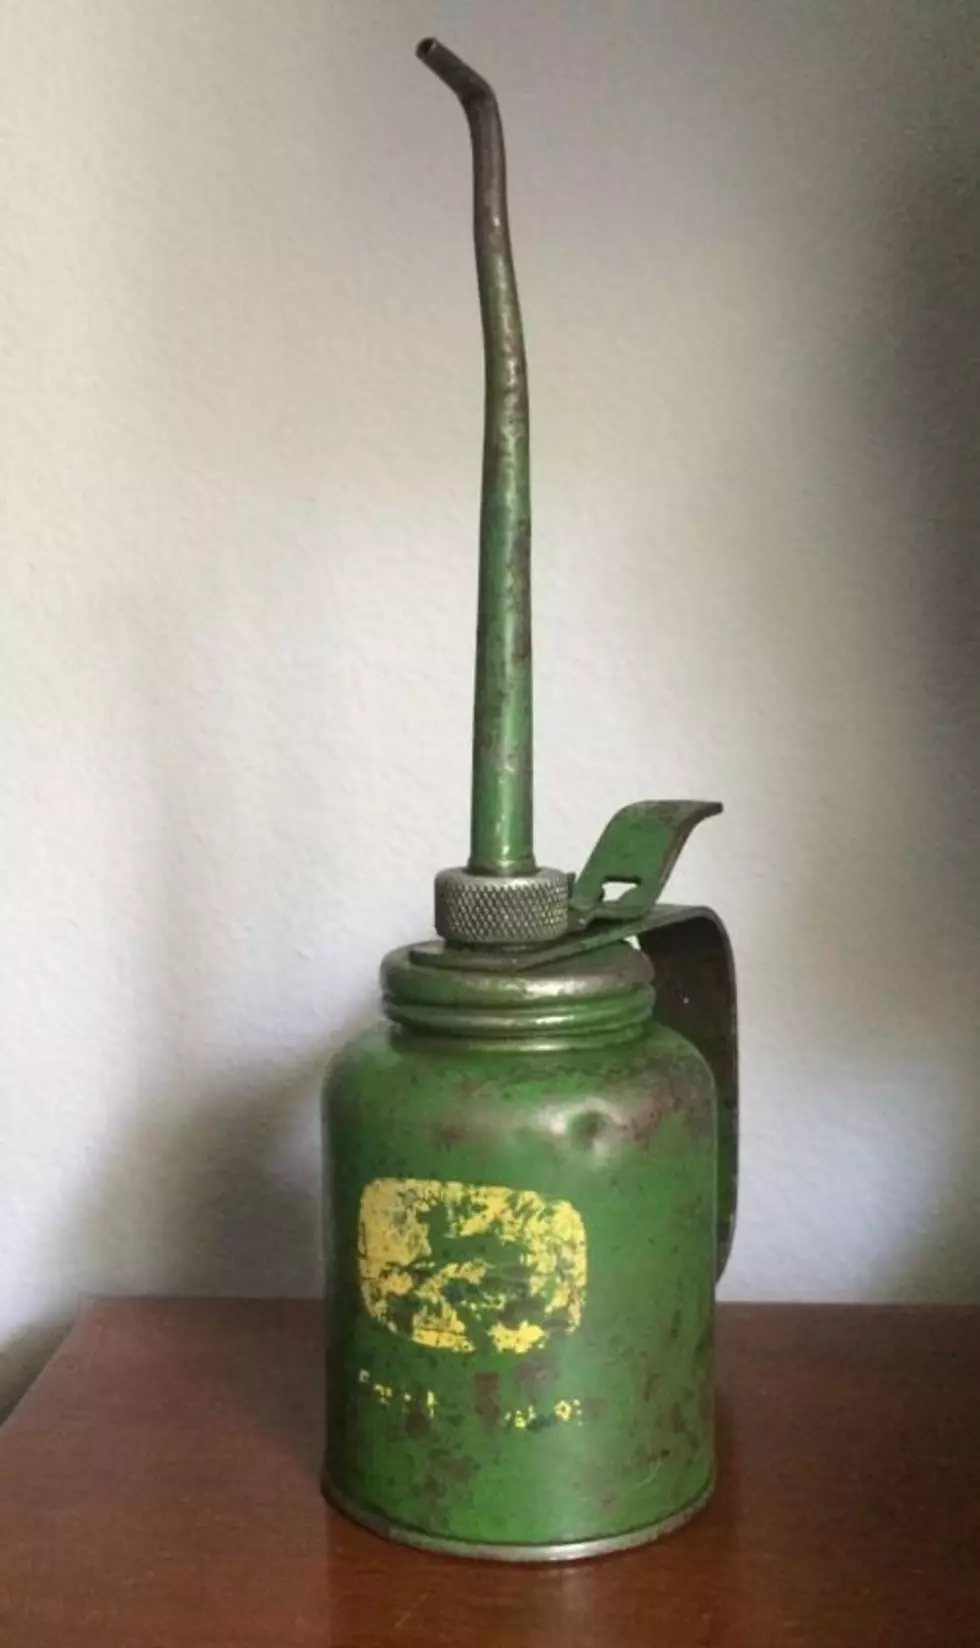 Cicero Family Looking For Man Who Bought &#8216;John Deere Oil Can&#8217;